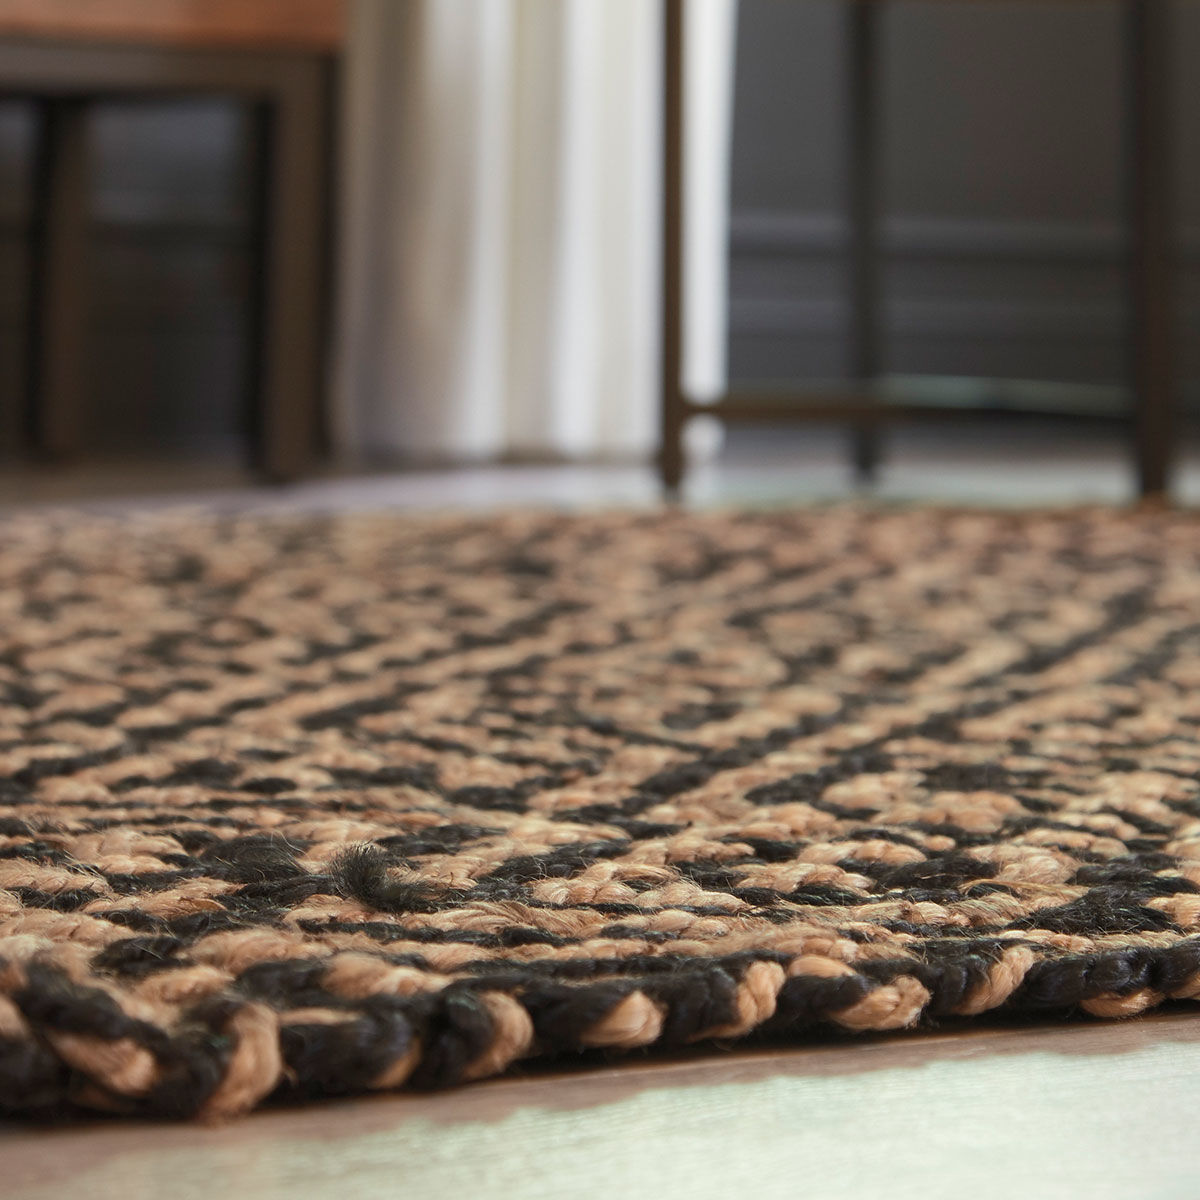 Picture of BROOX NATURAL/BLK 5X7 RUG